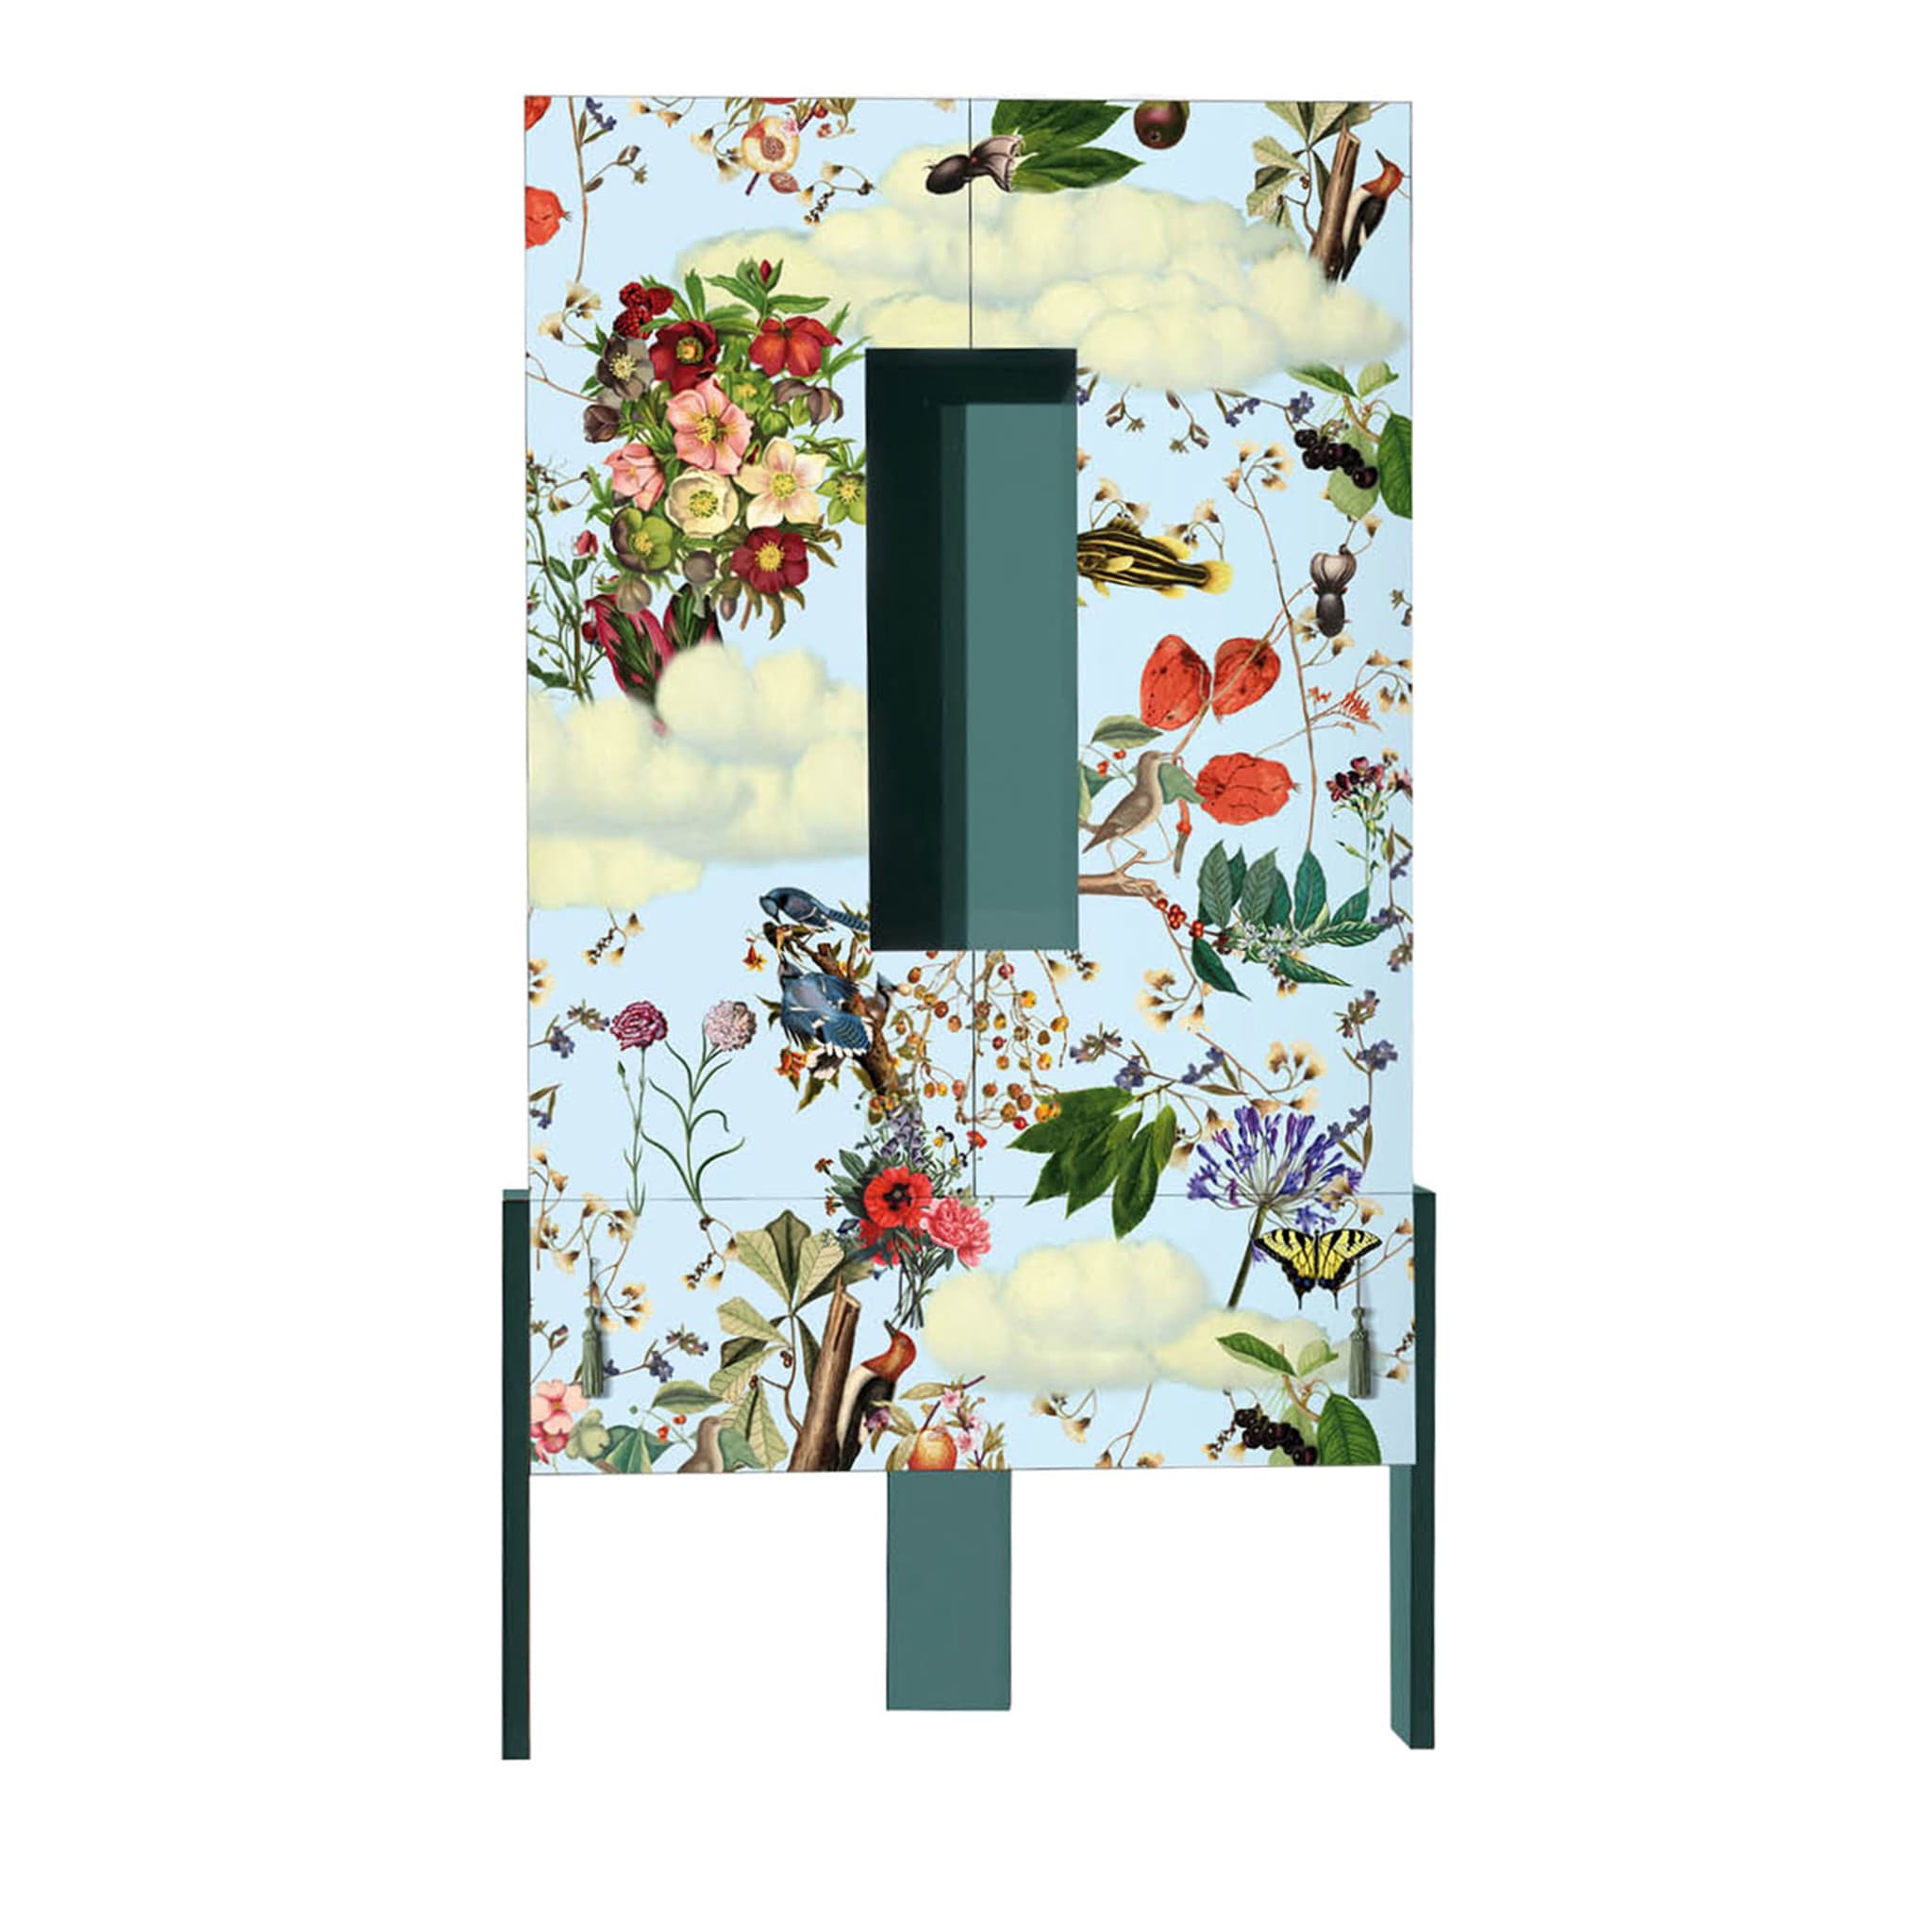 Ziqqurat Floral Polychrome Cabinet by Driade Lab #1 - Main view